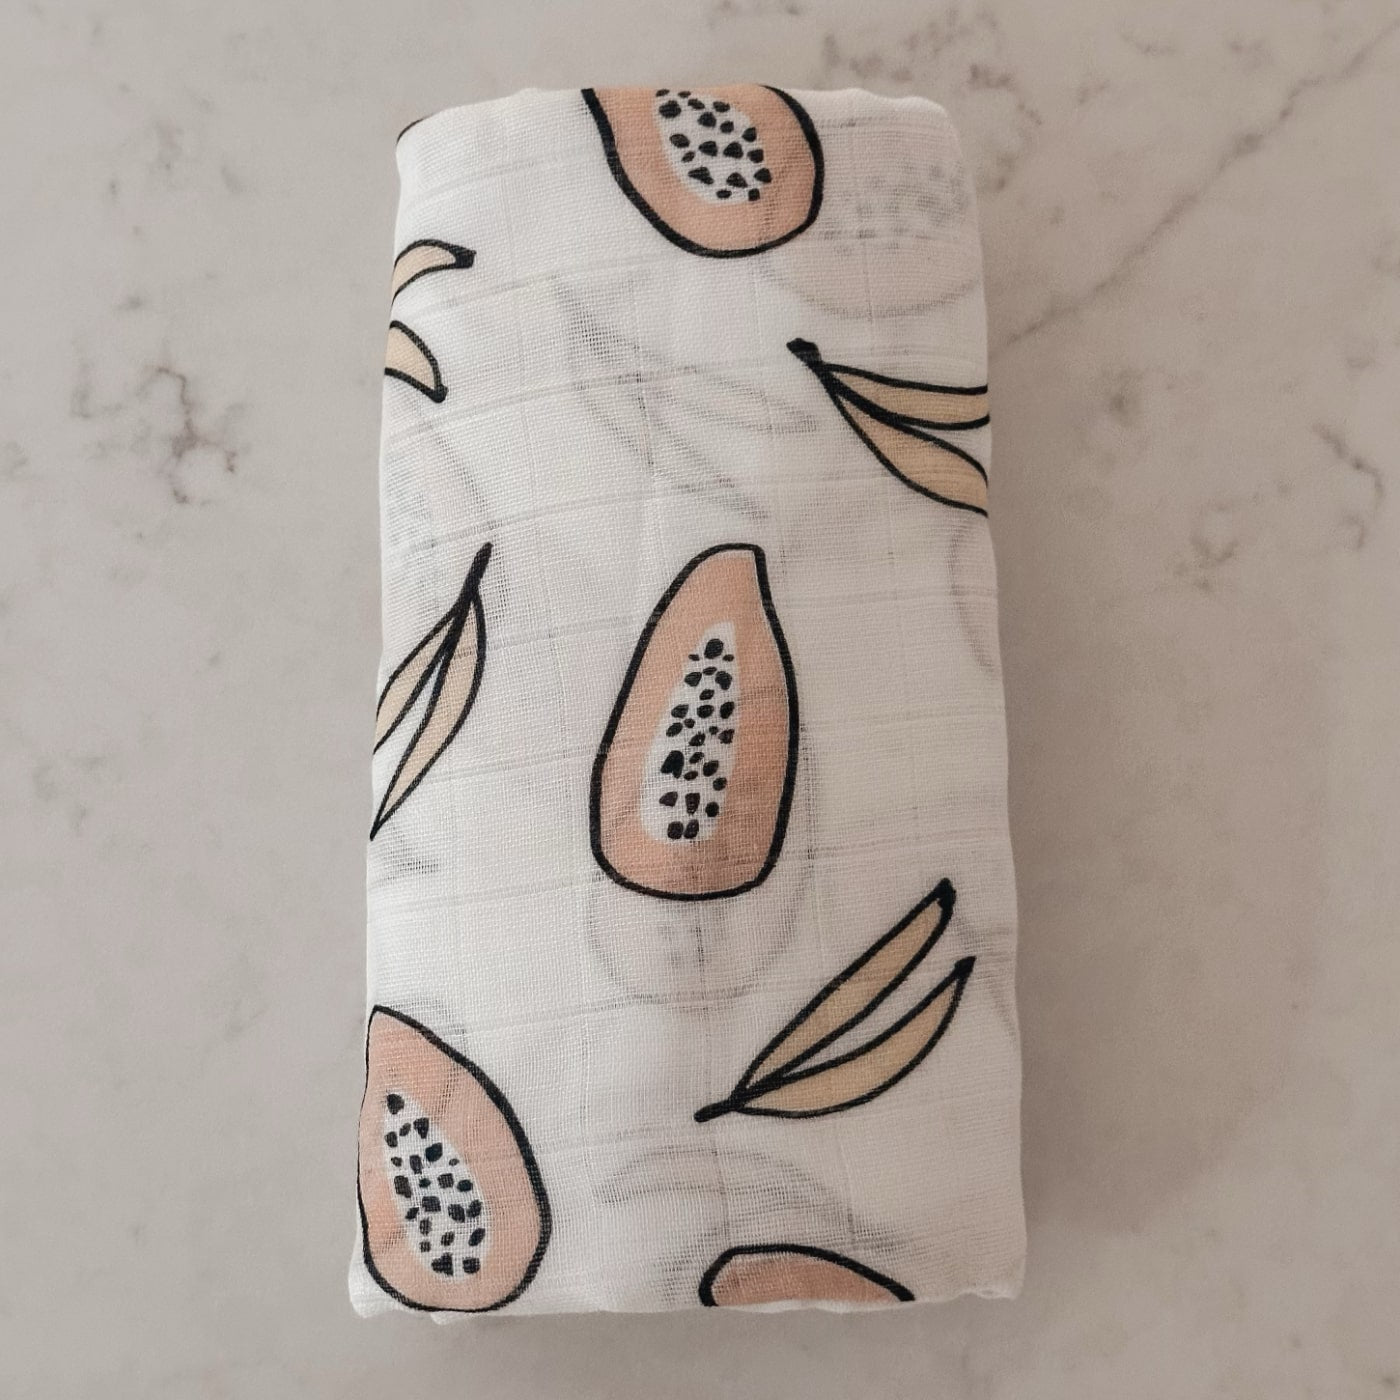 Fruit Salad Swaddle - Baby Swaddles at Louie Meets Lola